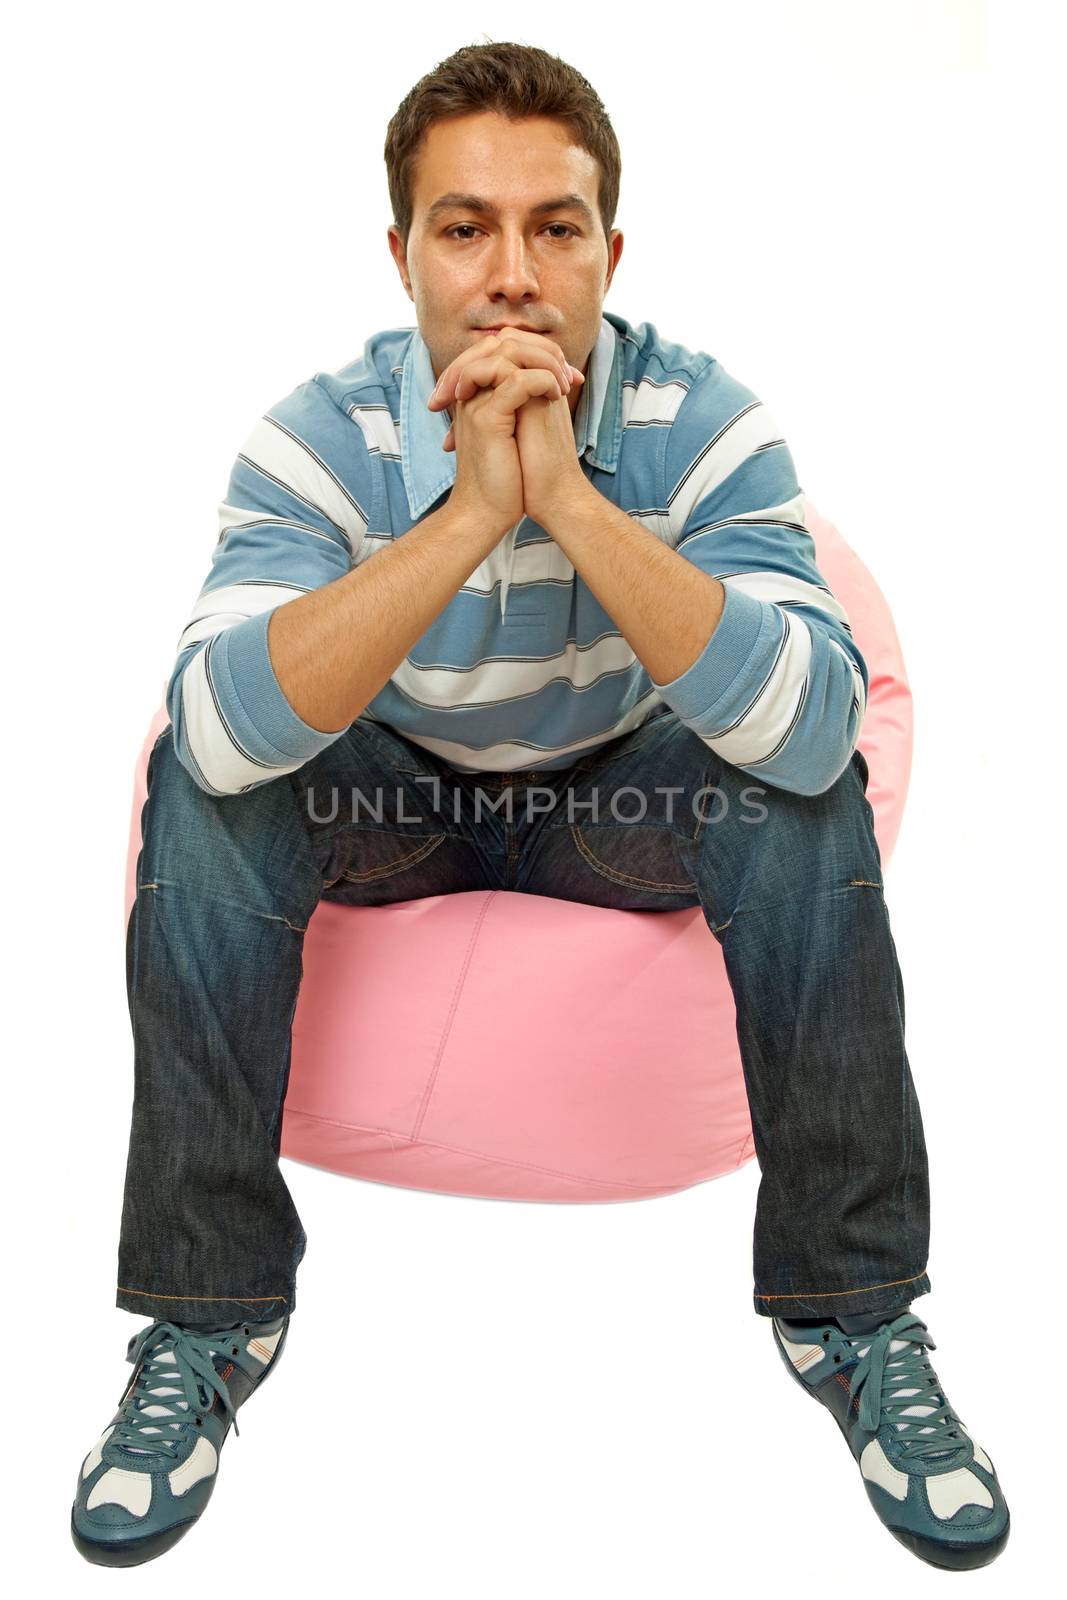 young casual man seated in a small sofa